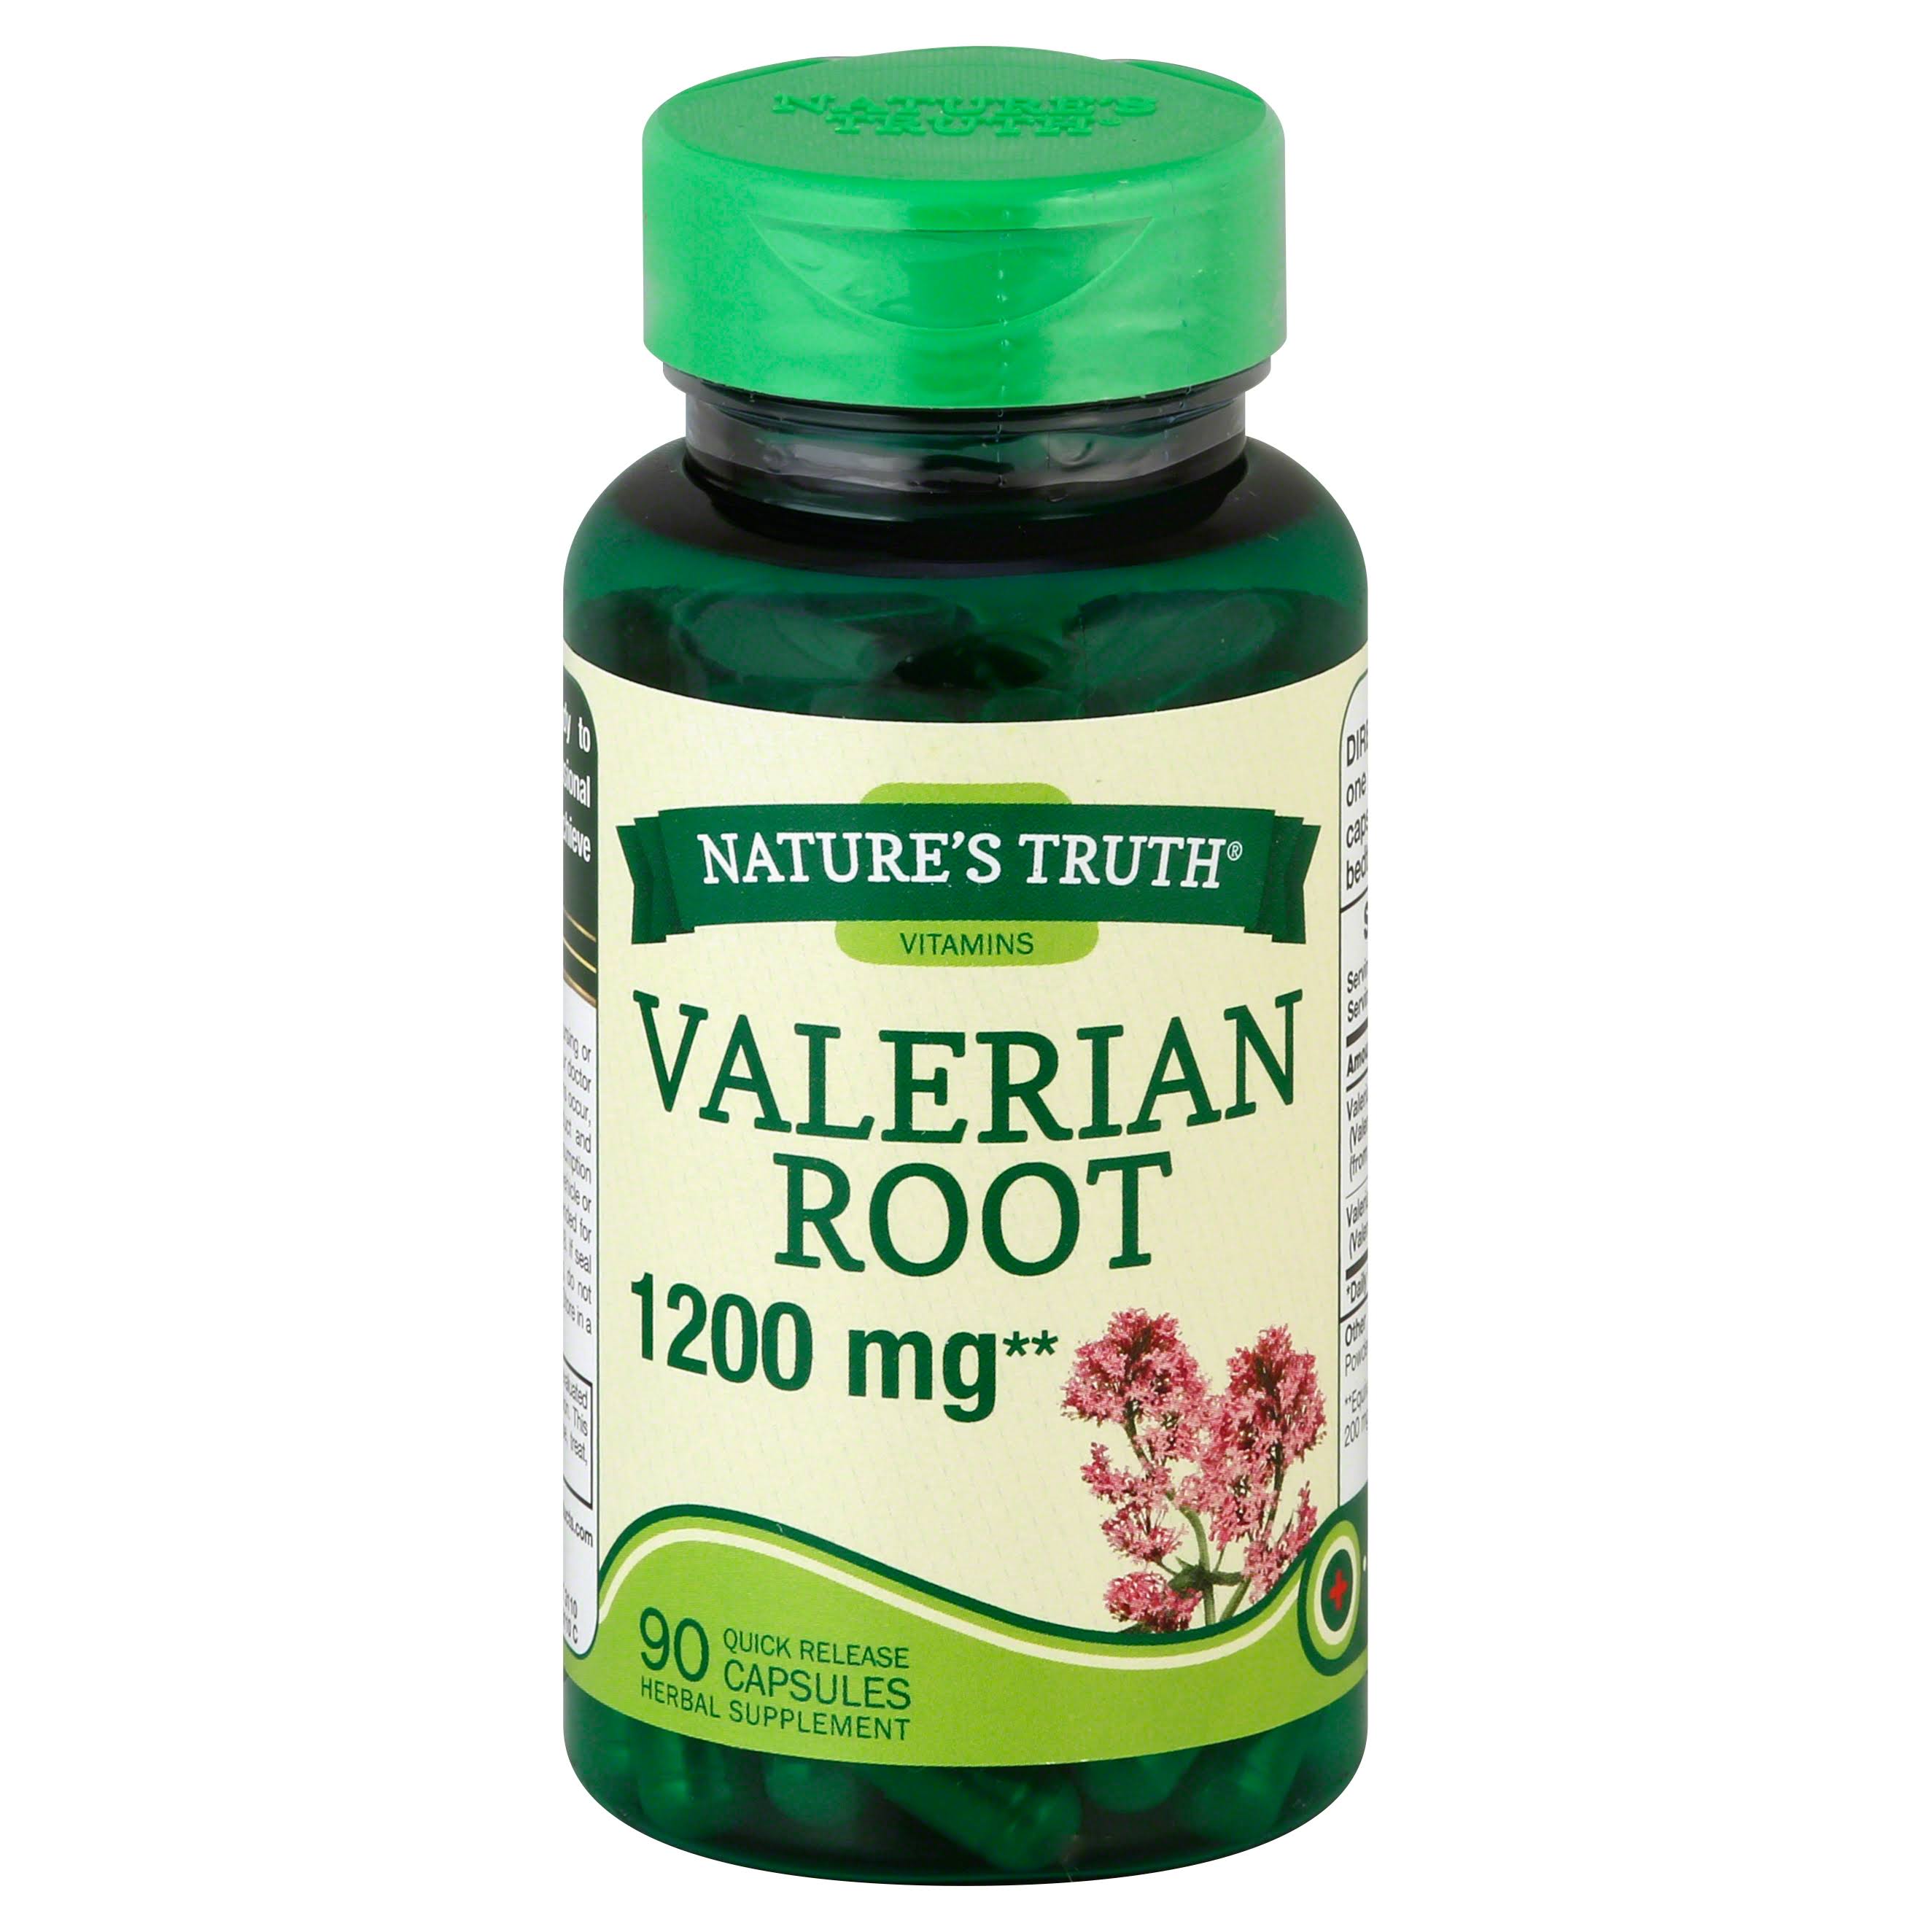 Nature’s Truth Valerian Root Supplement - 90ct, 1200mg